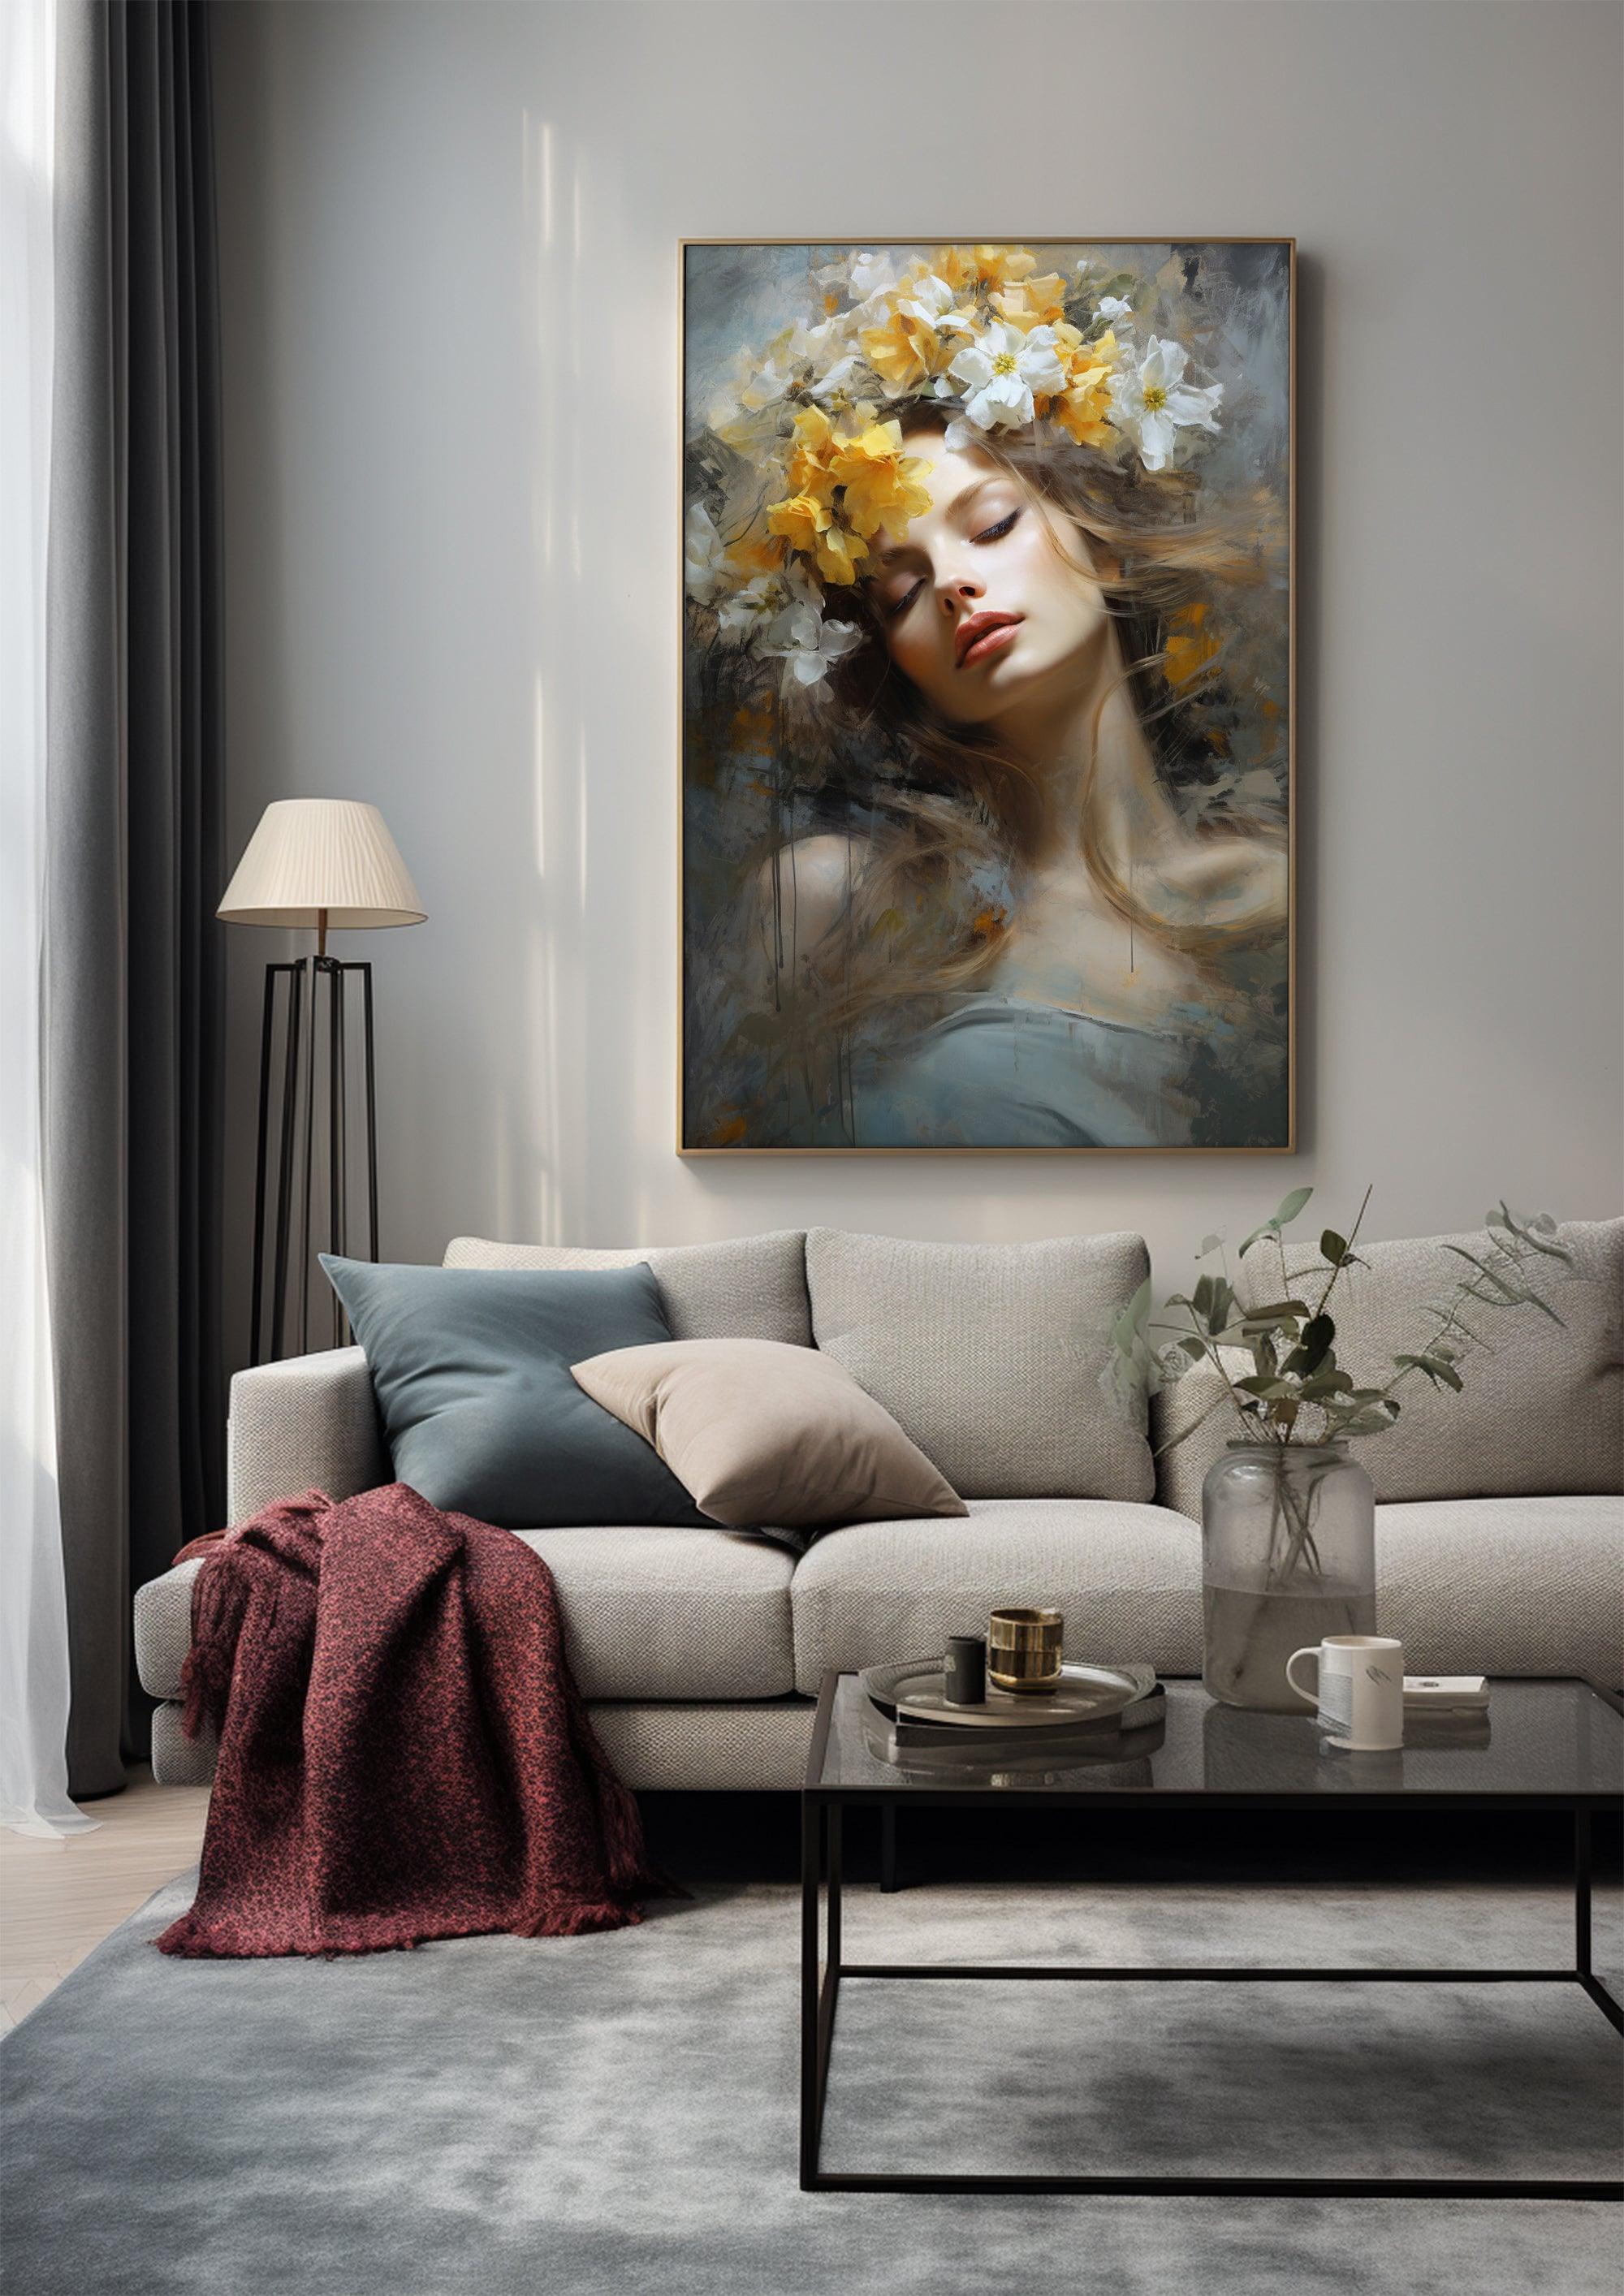 Beauty Woman Portrait，Hand Painted Colorful Decorative Canvas Artwork，Moody Wall Decor，Cotton Gloss Canvas Living Room Decor，High-Quality Waterproof Decorative Canvas Art